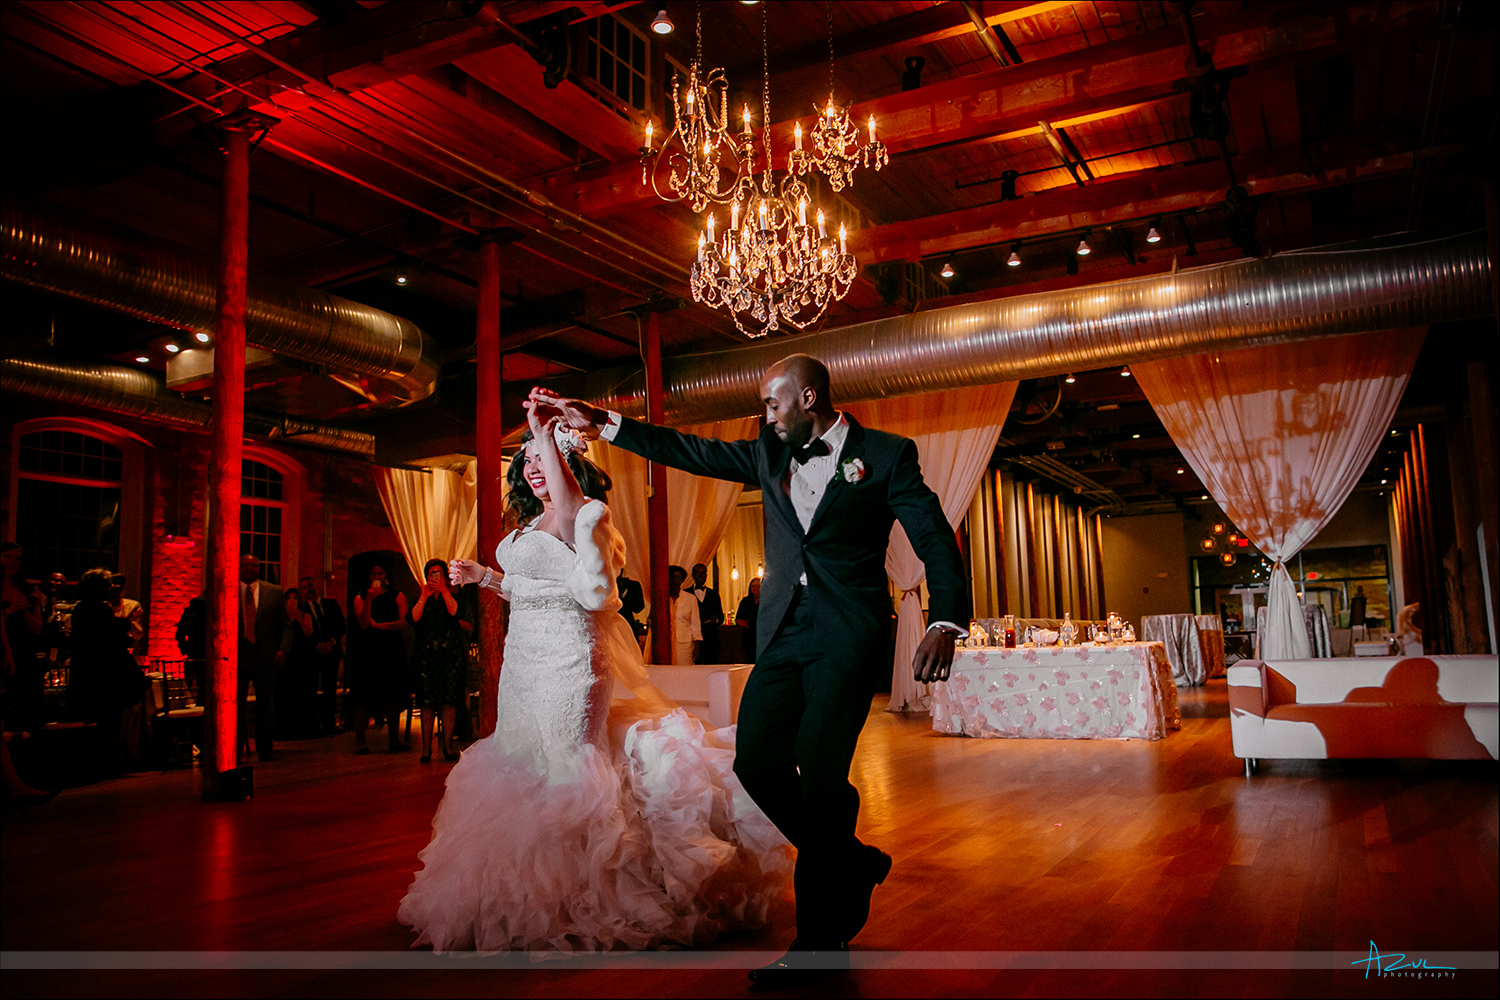 Wonderful first dance photography shot at The Cotton Room for a wedding recption in Duehm NC